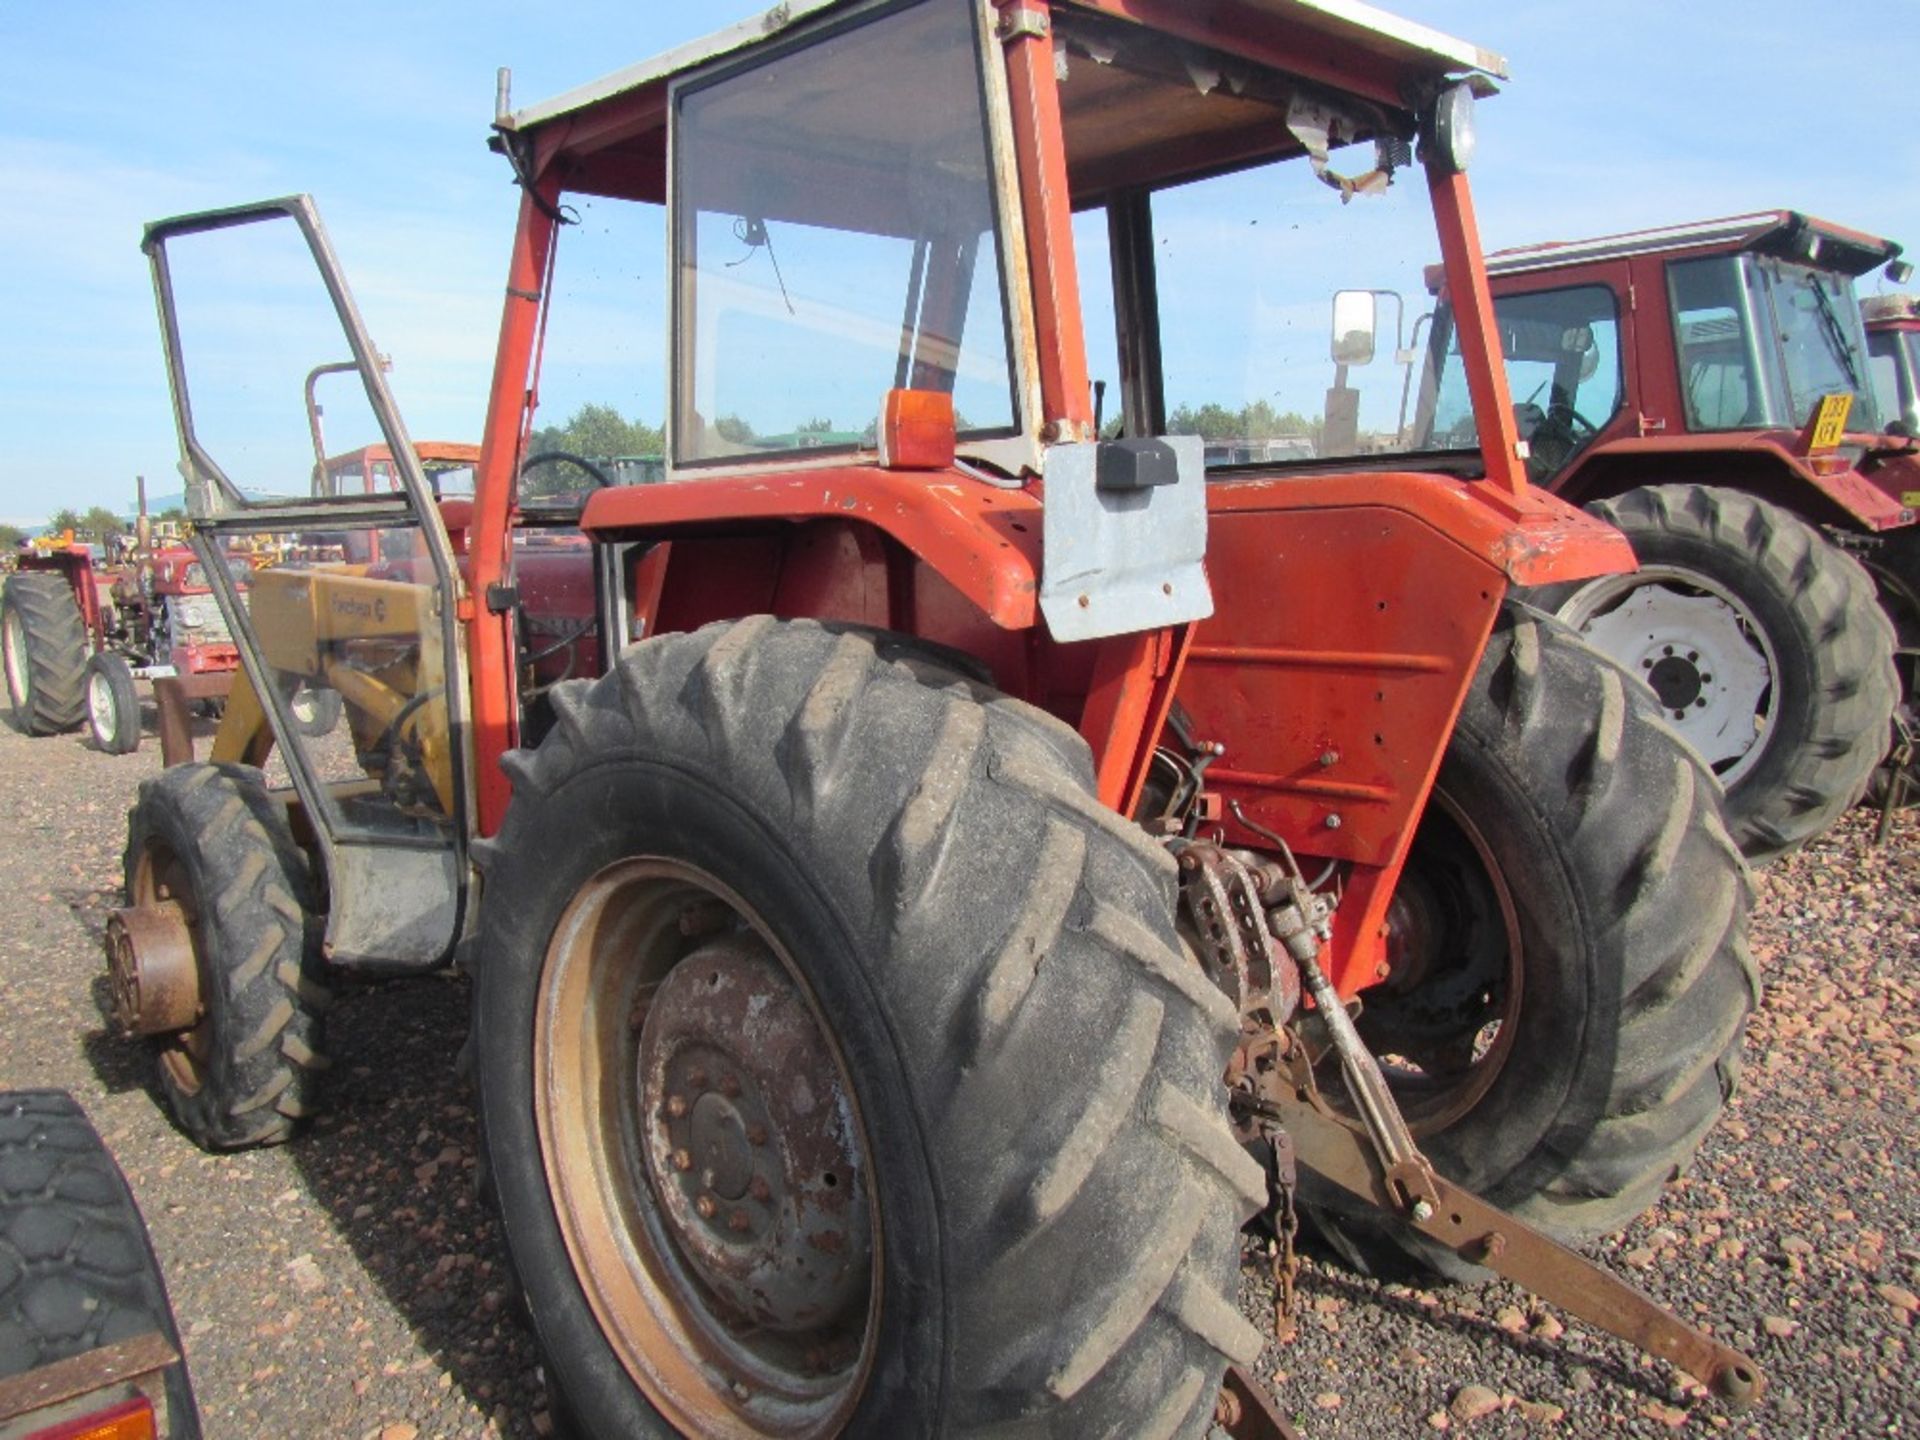 Massey Ferguson 168 4wd Tractor with Loader Ser No 2600115 - Image 6 of 6